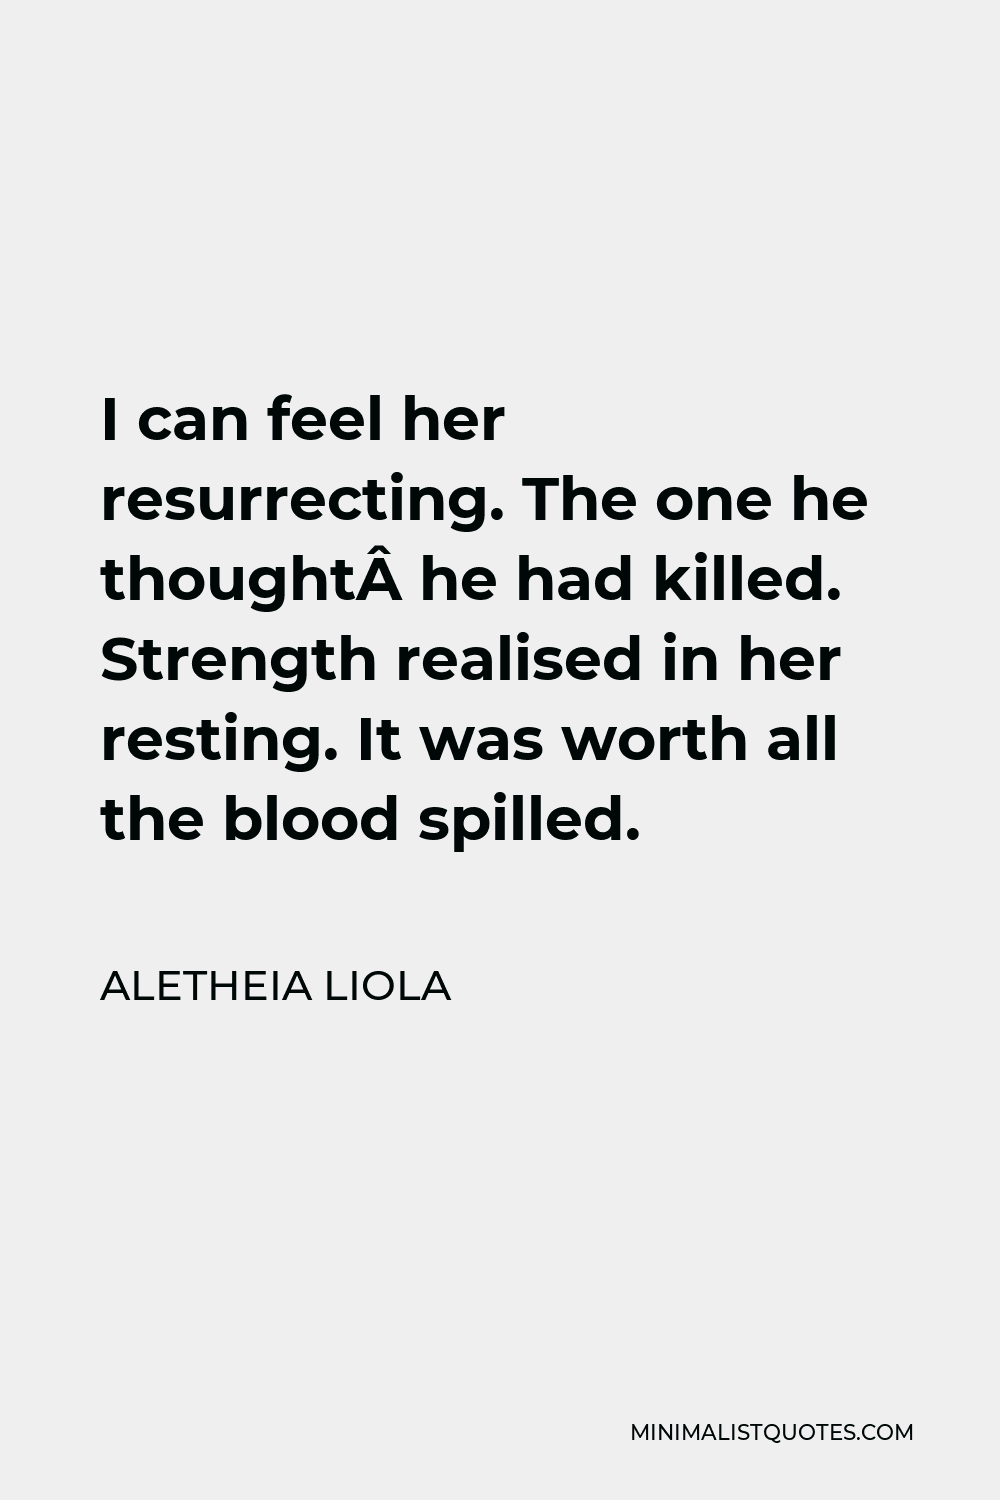 Aletheia Liola Quote - I can feel her resurrecting. The one he thought he had killed. Strength realised in her resting. It was worth all the blood spilled.